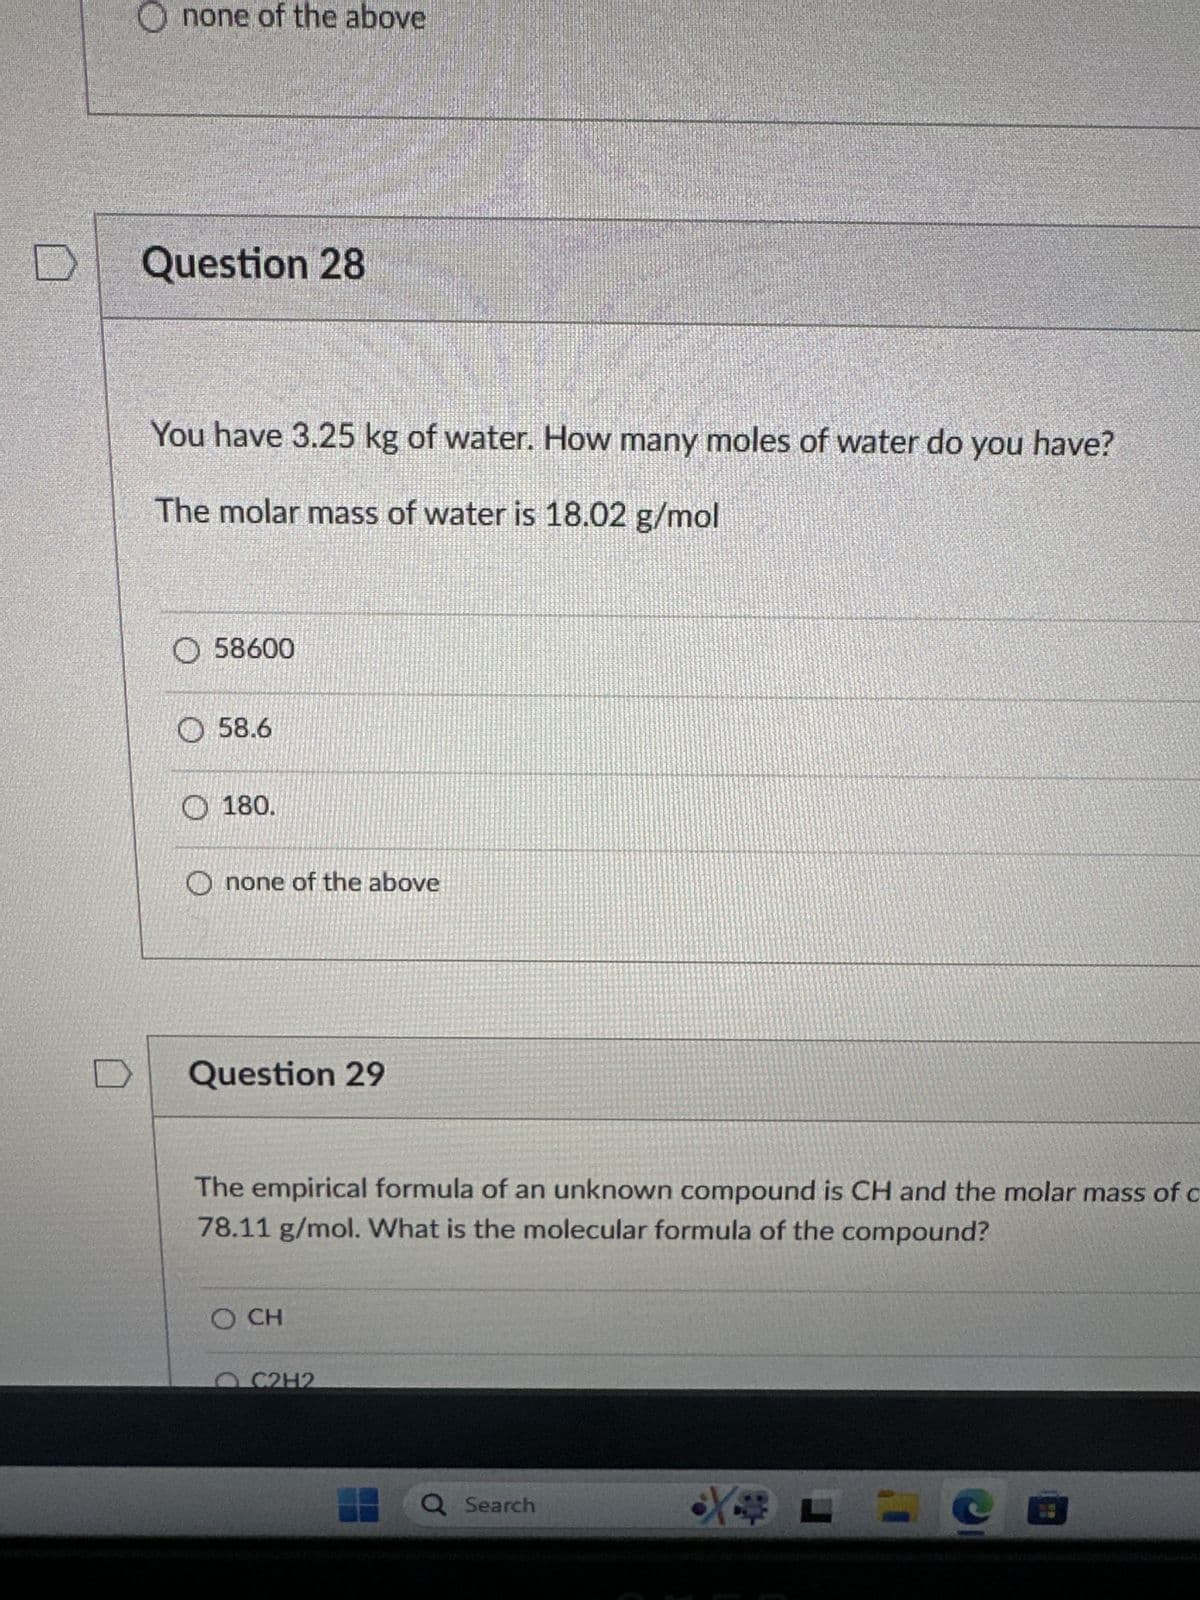 D
none of the above
Question 28
You have 3.25 kg of water. How many moles of water do you have?
The molar mass of water is 18.02 g/mol
58600
58.6
180.
none of the above
Question 29
The empirical formula of an unknown compound is CH and the molar mass of c
78.11 g/mol. What is the molecular formula of the compound?
O CH
OC2H2
Q Search